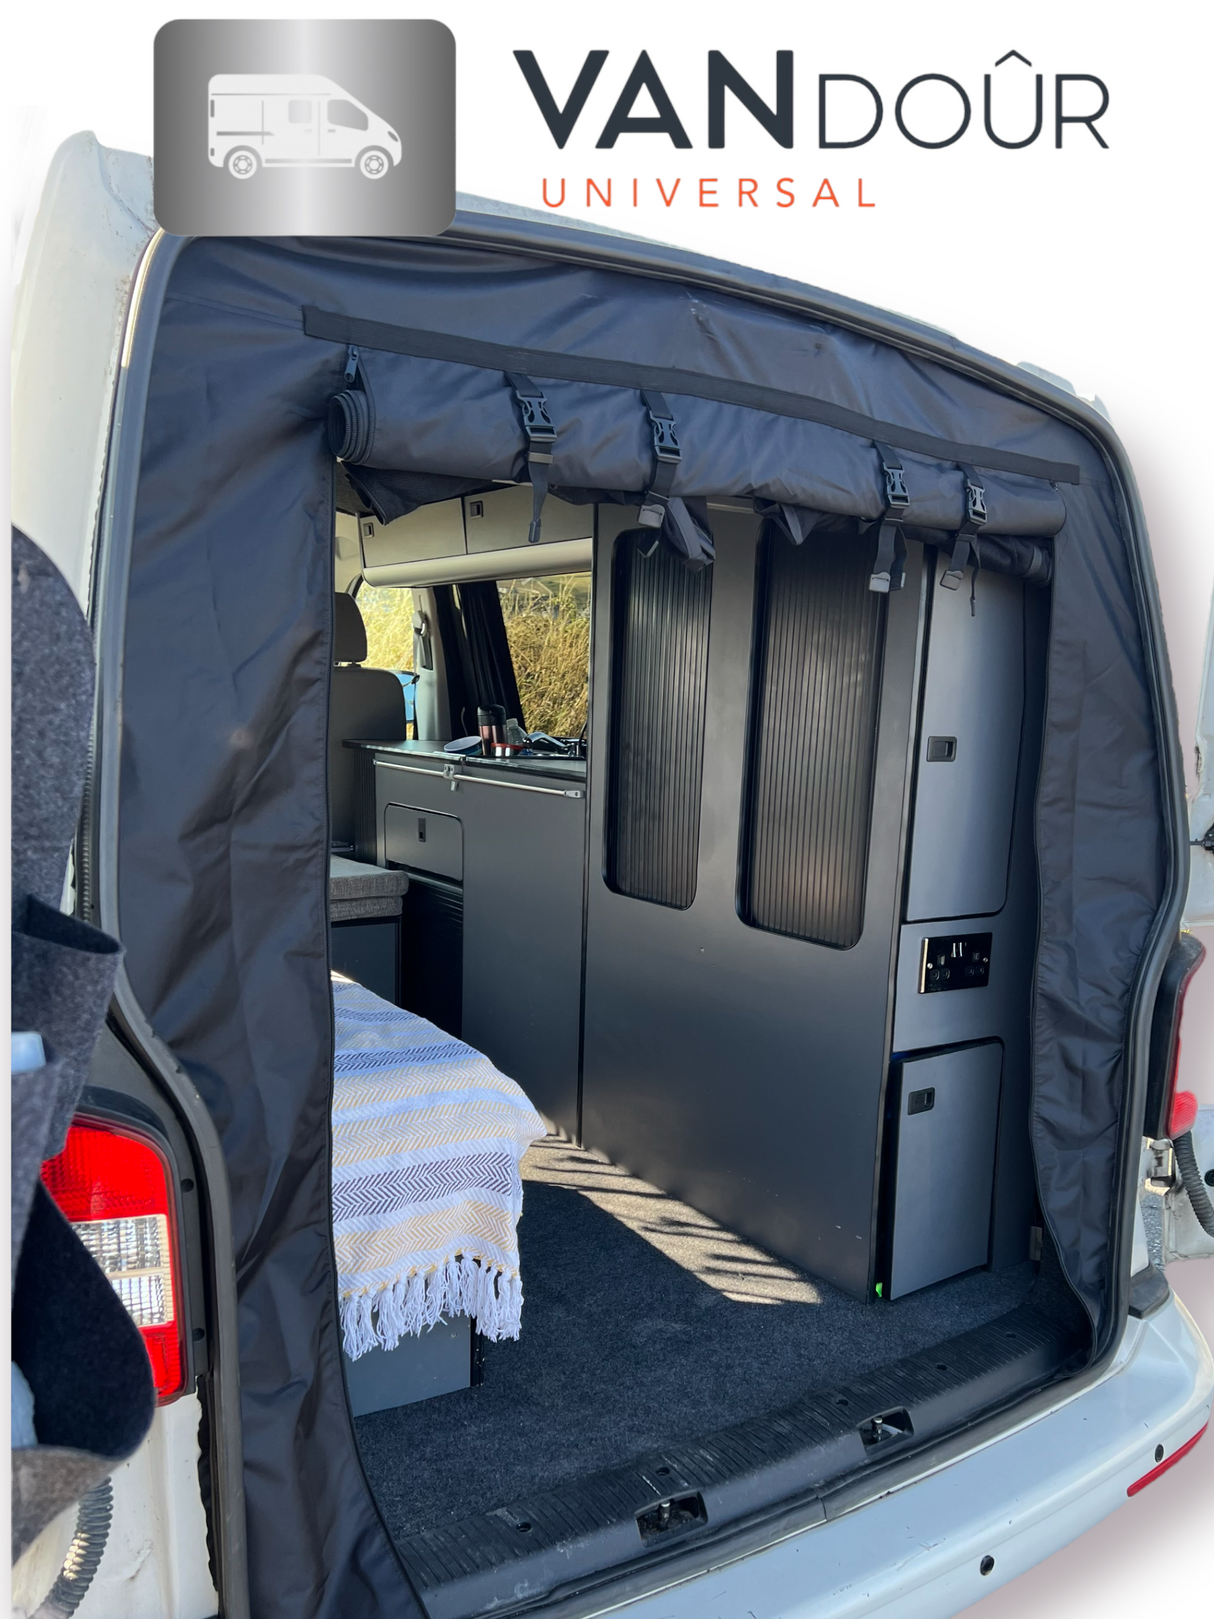 SWB VANdoûr Universal Campervan 4 in 1 Mosquito + Fly Net + Waterproof / Privacy Layer, to fit either side or rear.